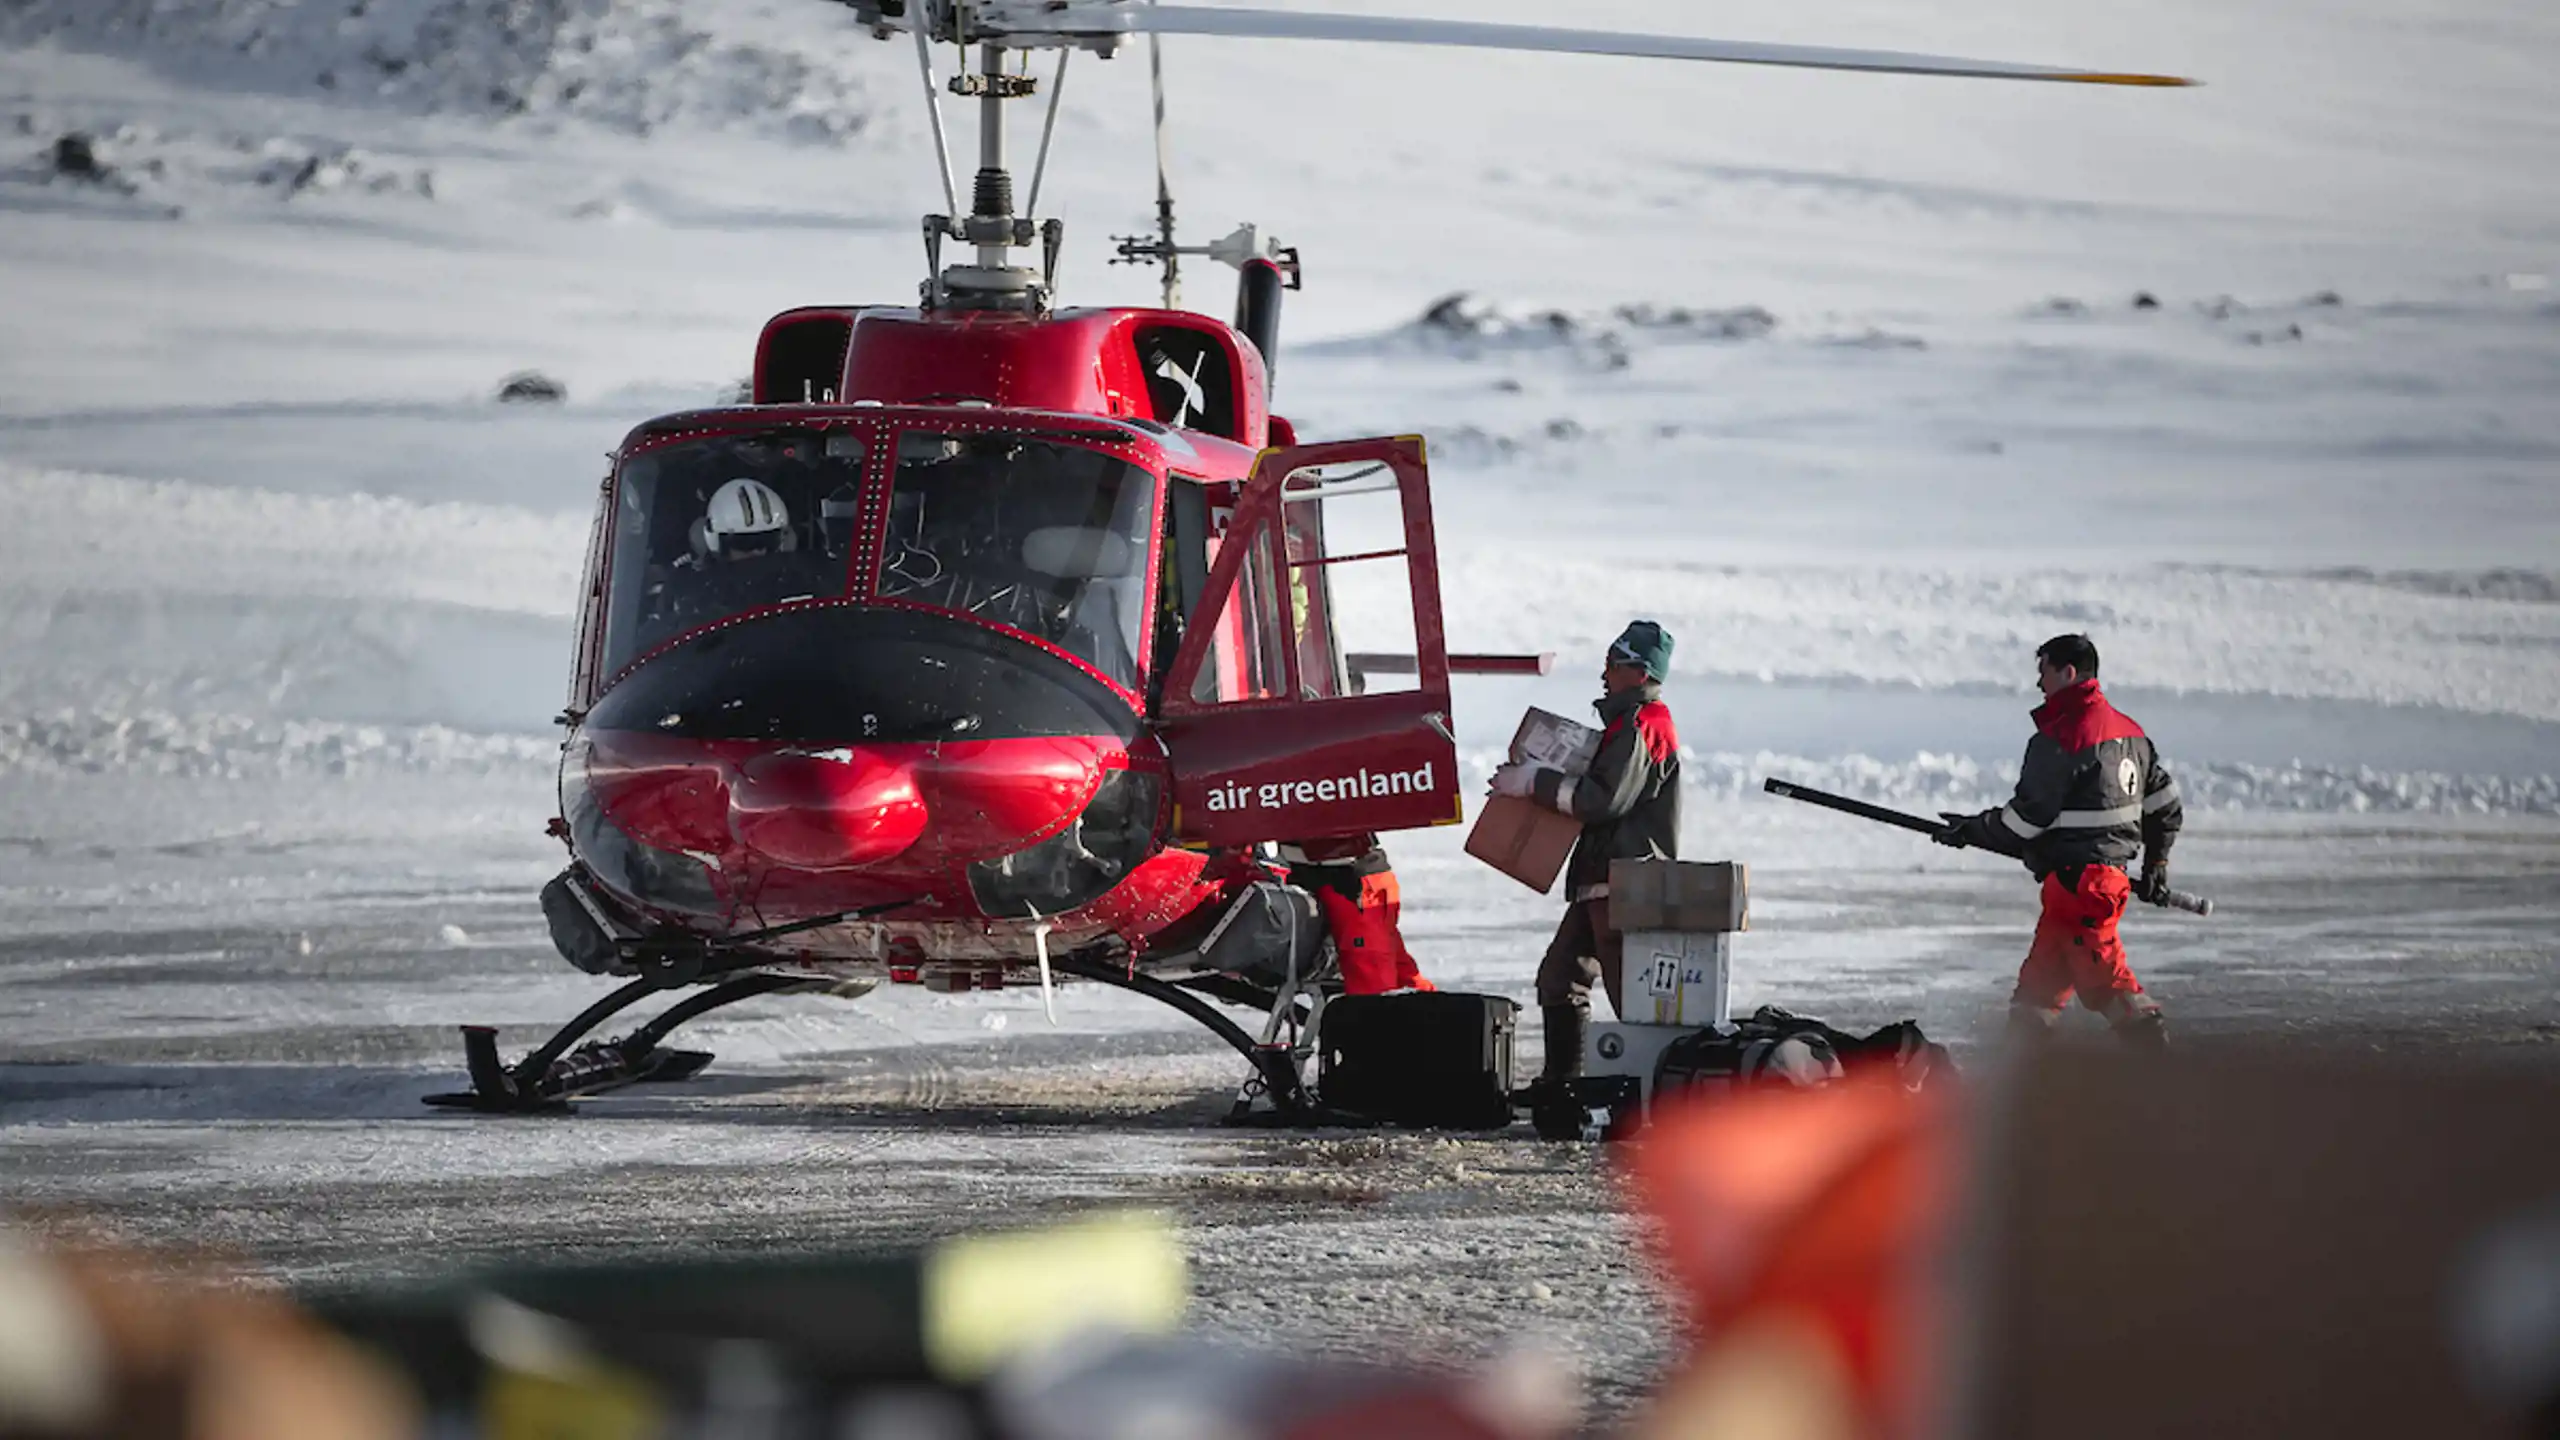 Airport Personnel Loading An Air Greenland Bell 212 Passenger Helicopter In Kulusuk Airport, East Greenland